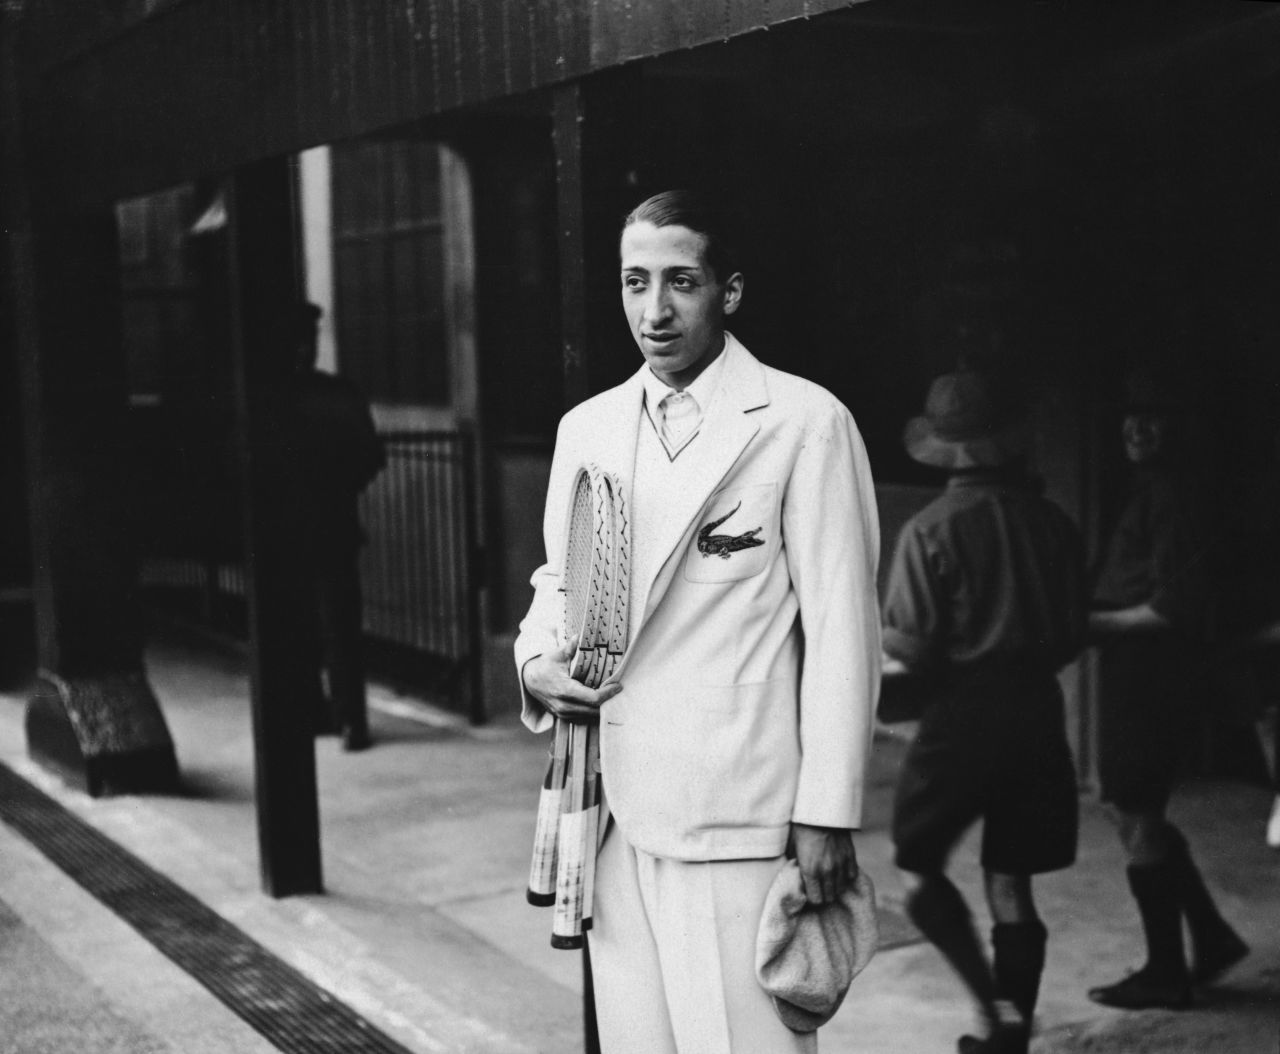 Off the court, French player Rene Lacoste made his name as a fashion icon with his crocodile motif (pictured here in 1932).<br />"Lacoste, which became the polo shirt, has really become a staple of American and European menswear," says Rothenberg.<br />"It's the most lasting fashion footprint worldwide coming from tennis."